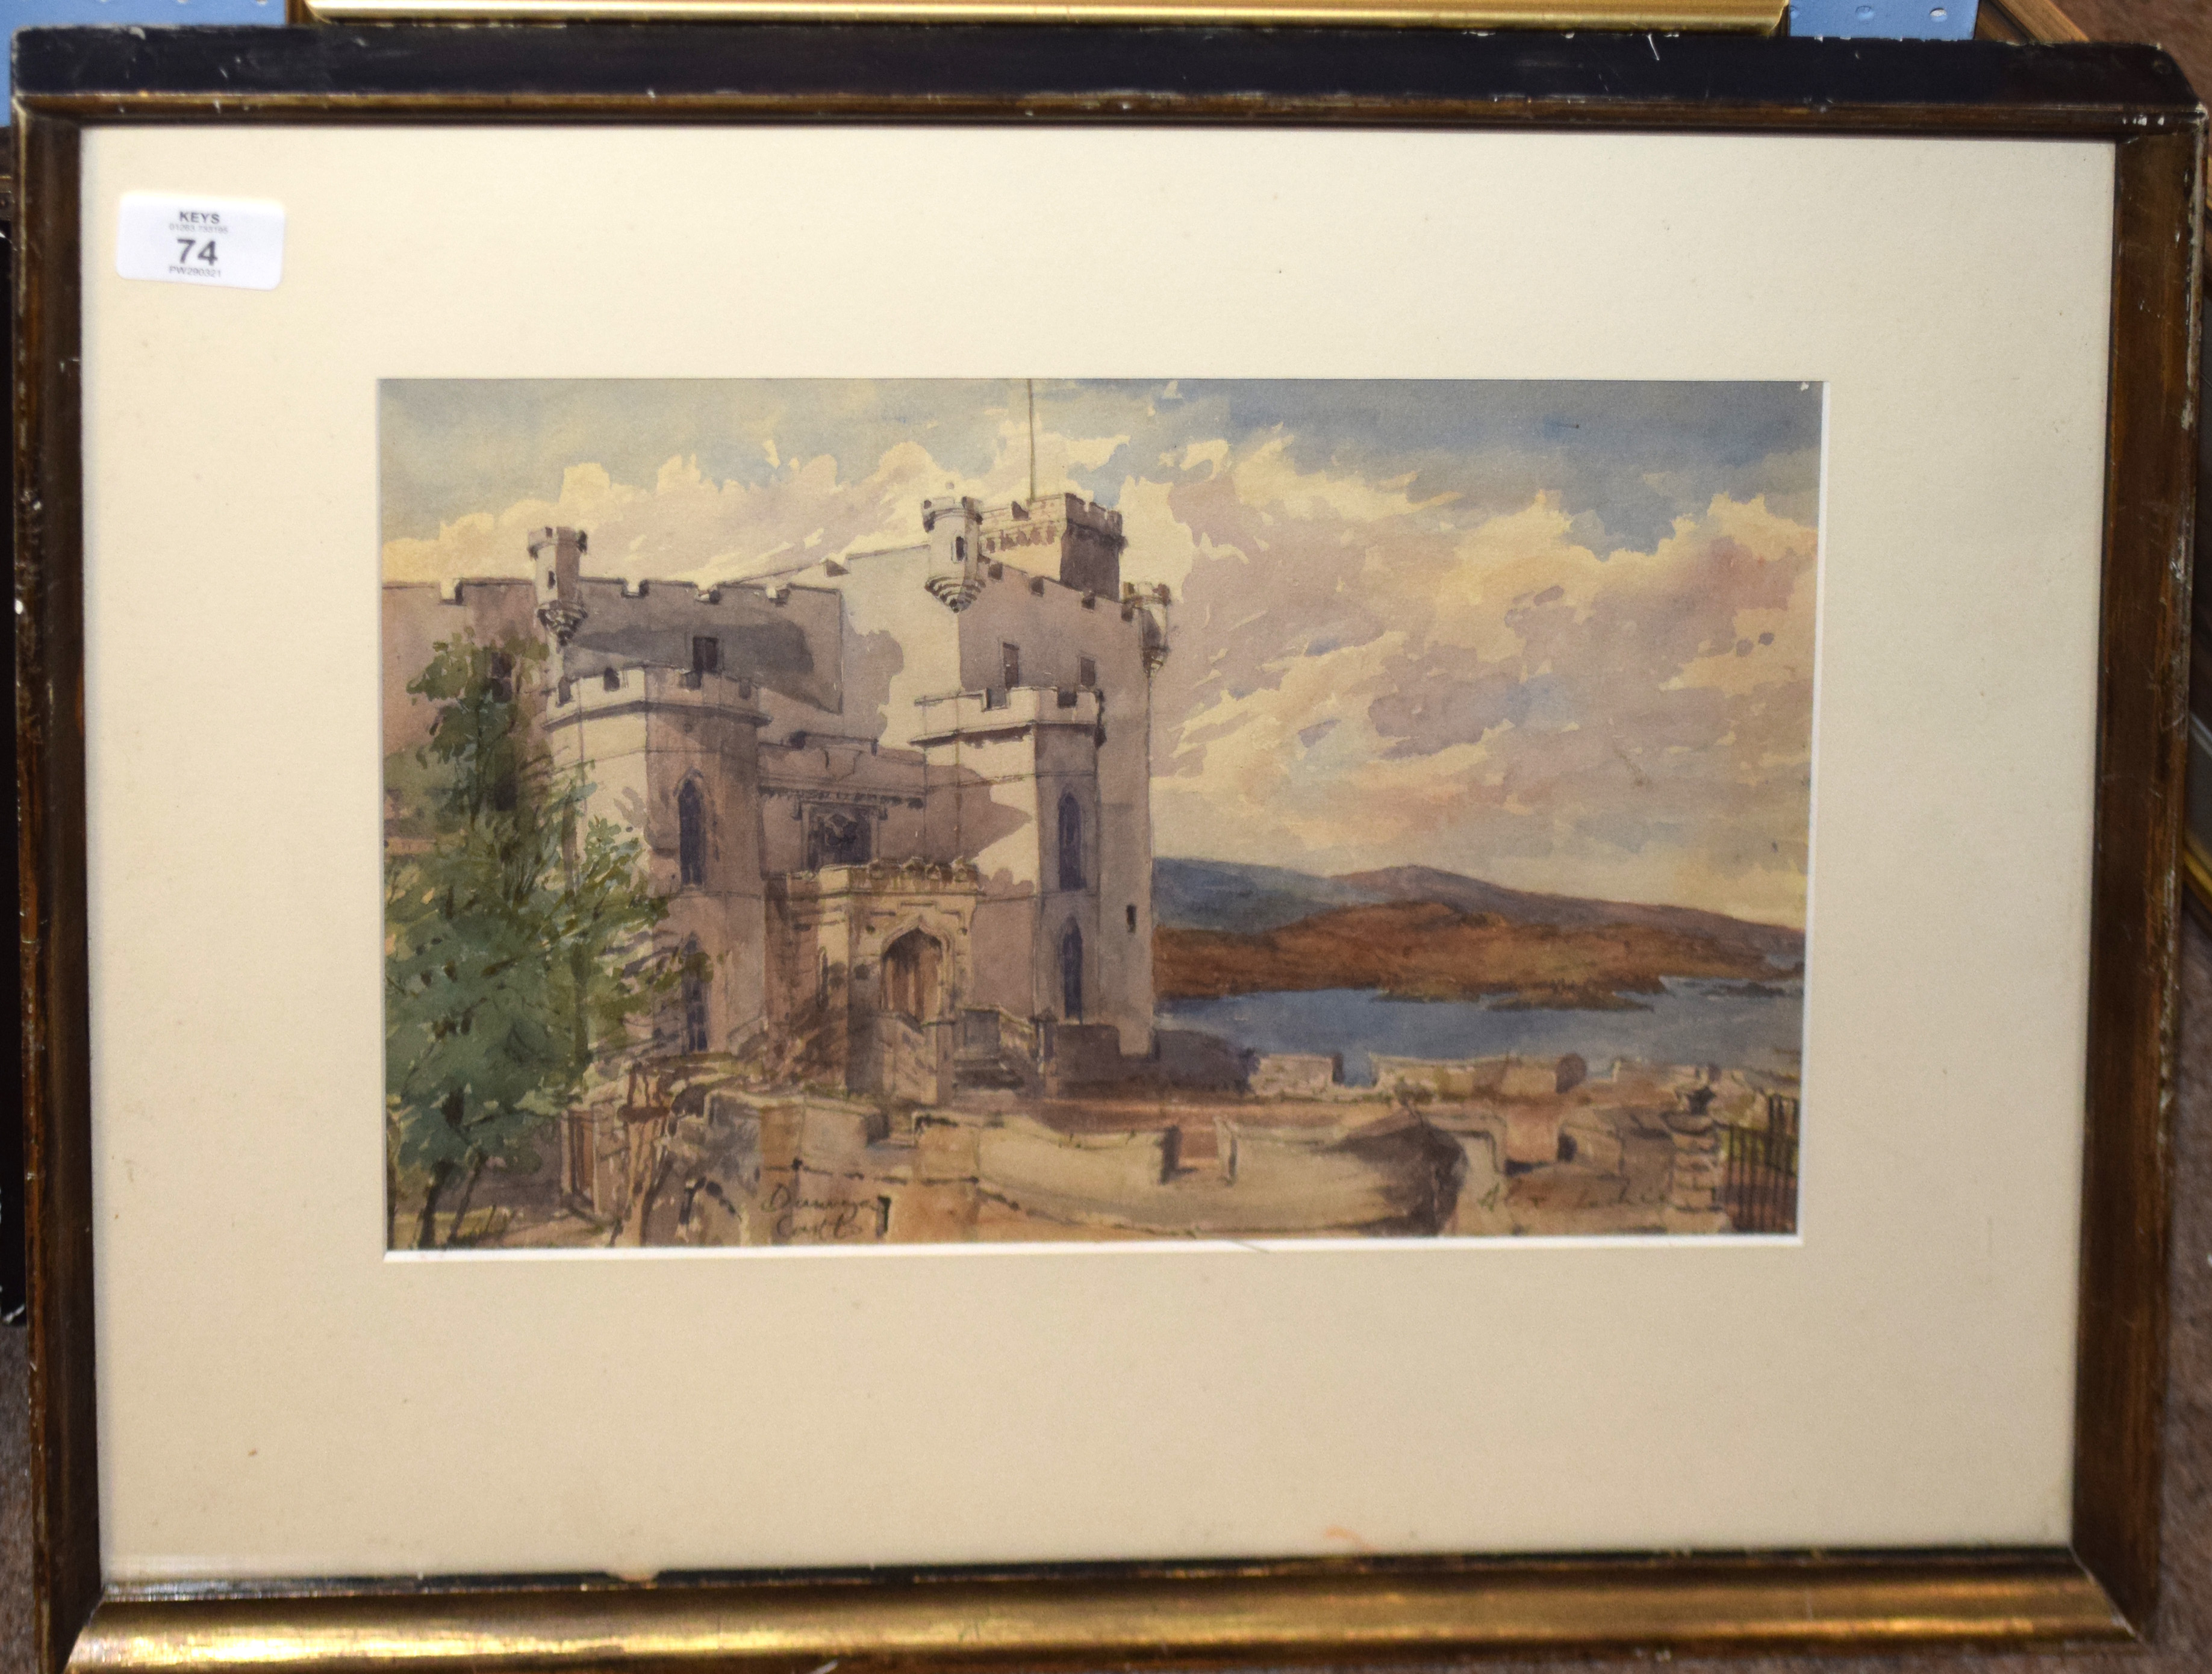 Alexander Leckie, "Dunvegan Castle", watercolour, signed and inscribed with title, 24 x 34cm